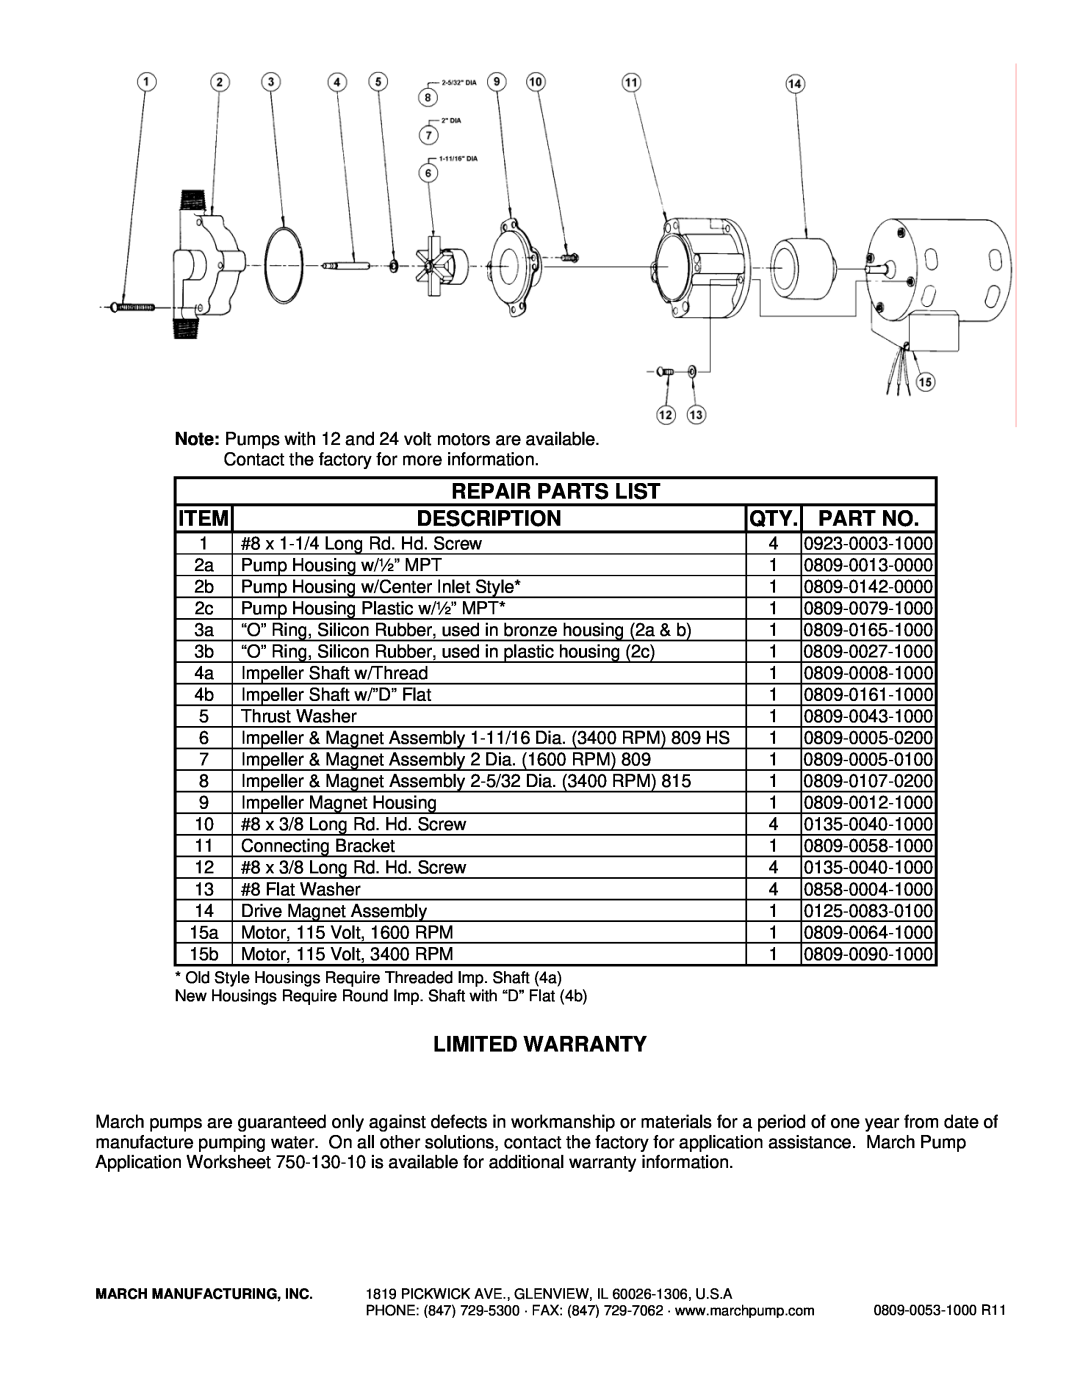 March Products Water Pump specifications Repair Parts List, Description, Limited Warranty 